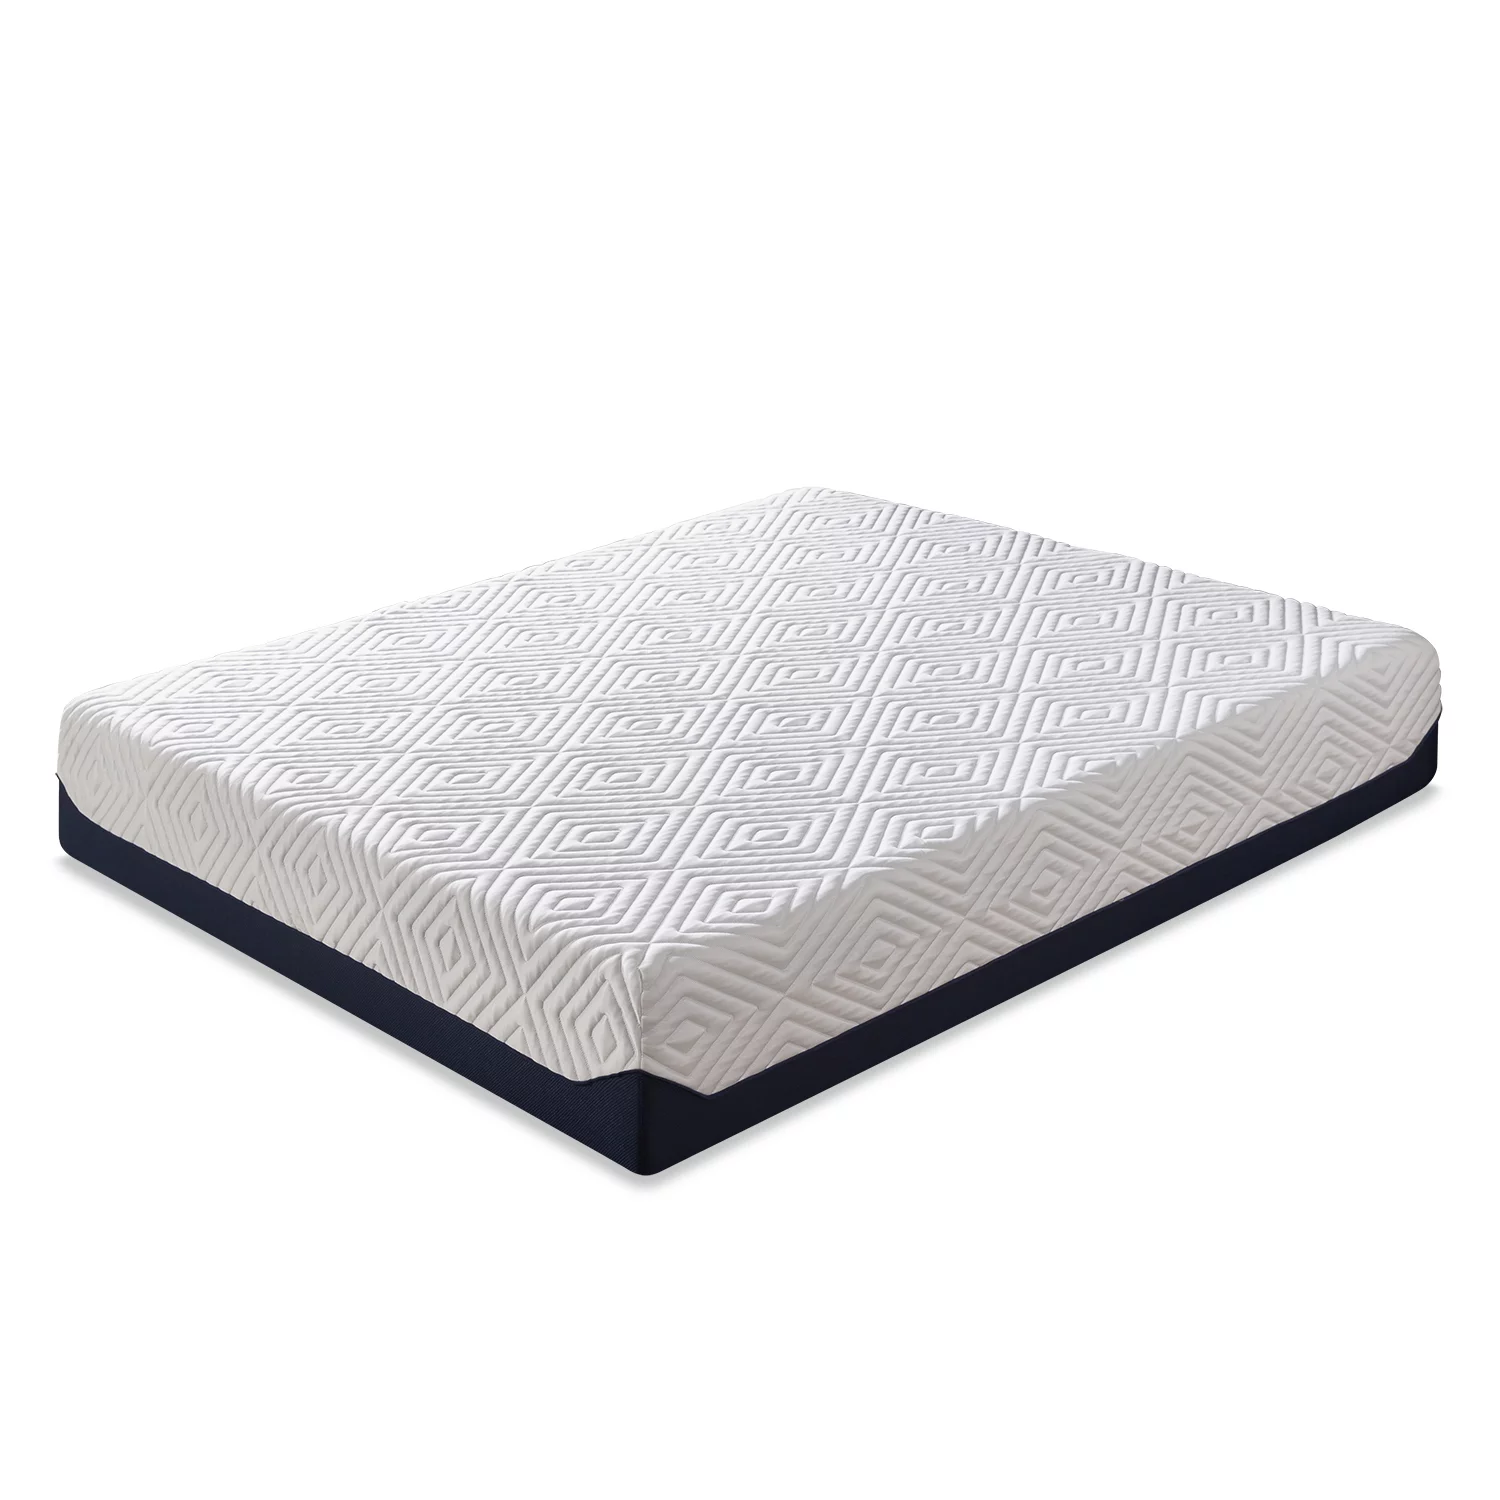 Spa Sensations by Zinus 12" & 14" Breathable Cooling Memory Foam Mattress, Multiple Sizes